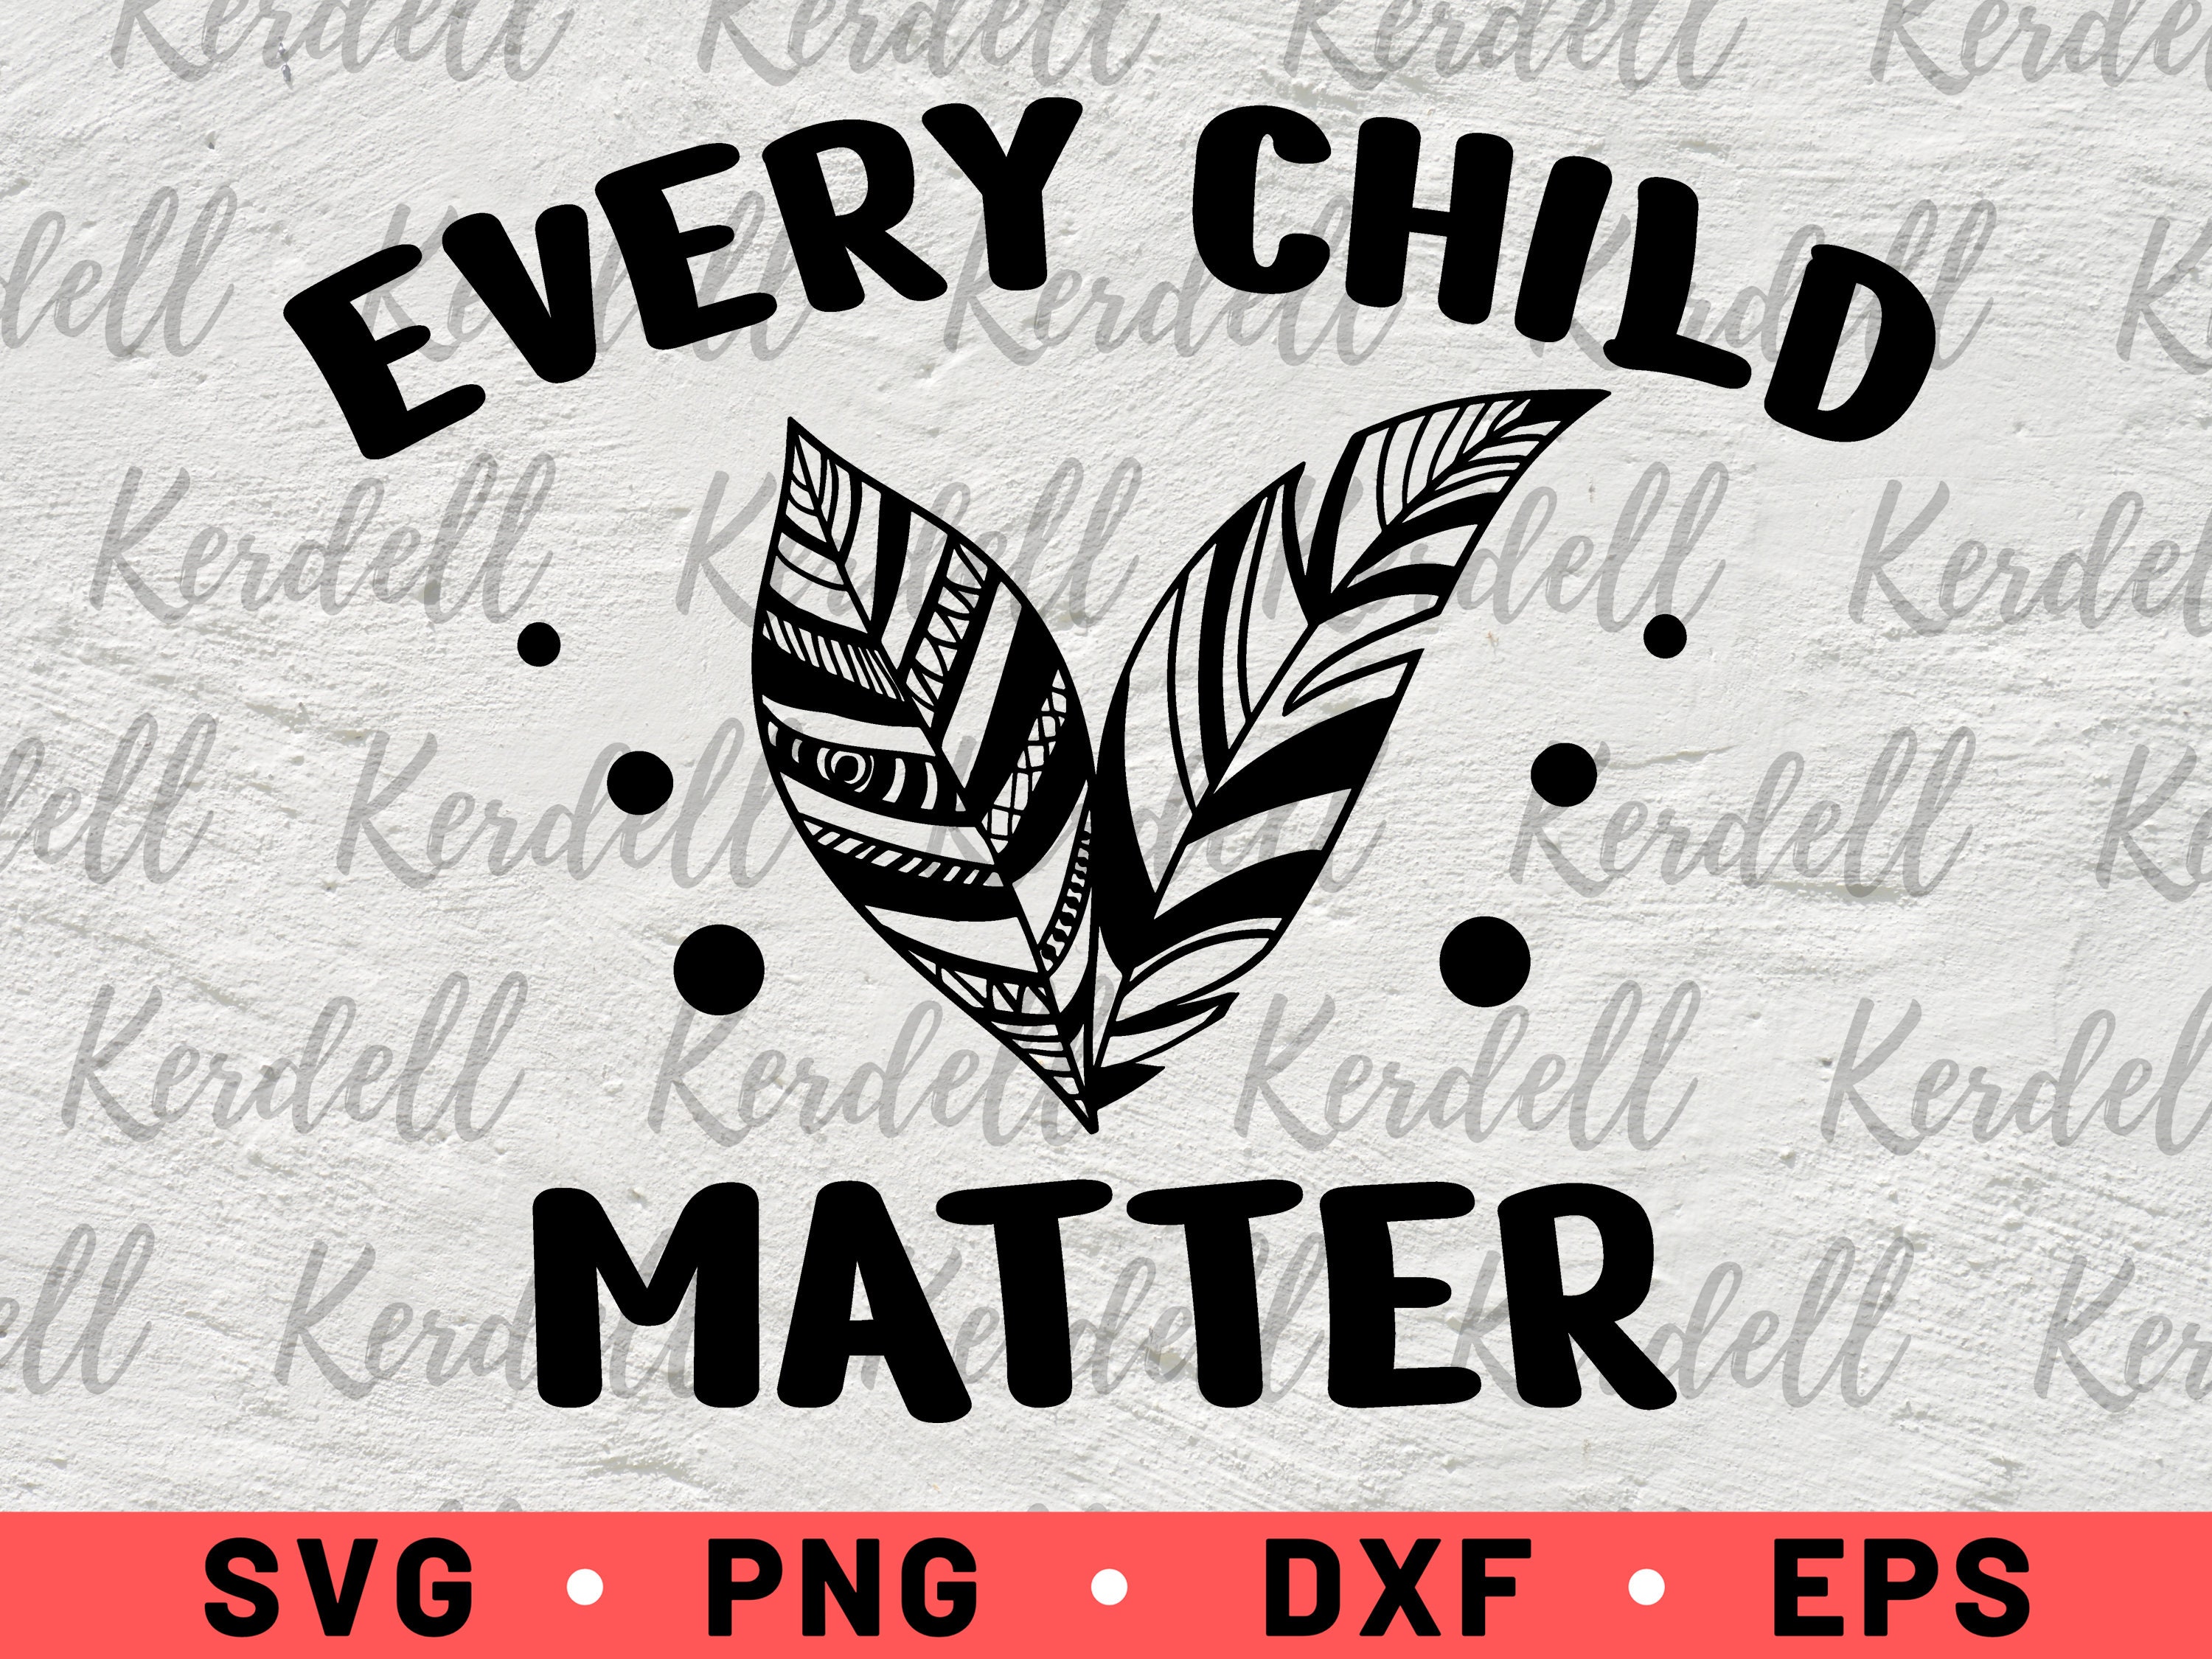 Every child matters SVG Quote svg SVG files for shirts Feathers svg Child svg Instant download Every child matters download